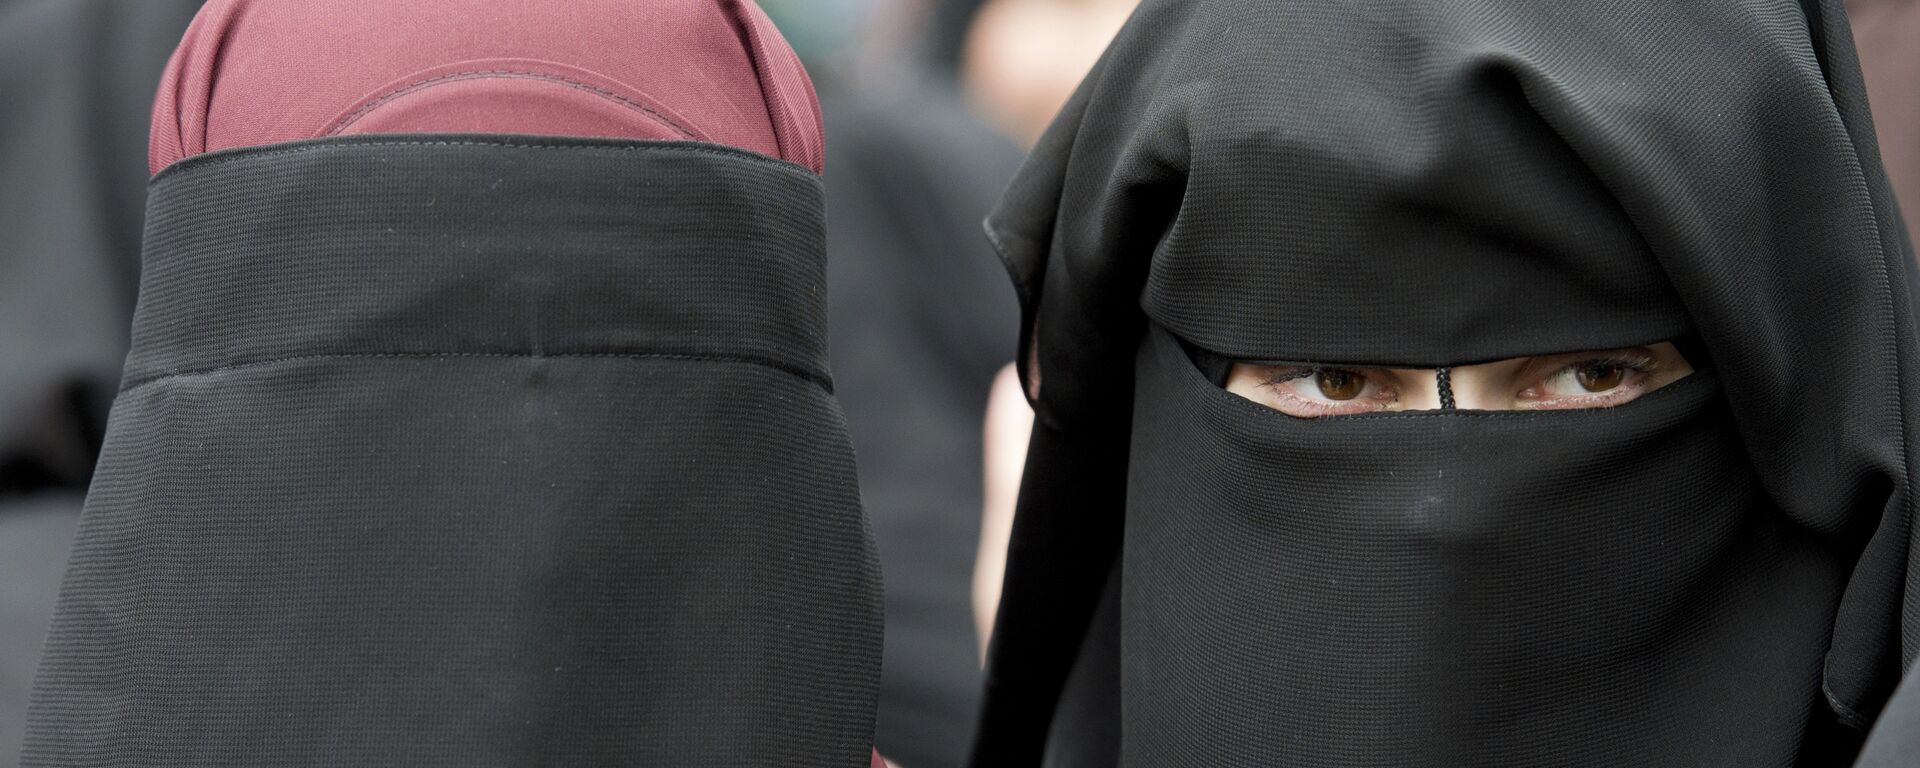 In this June 28, 2014 file photo veiled women attend a speech by preacher Pierre Vogel, in Offenbach, near Frankfurt, Germany. A law that forbids any kind of full-face covering, including Islamic veils such as the niqab or burqa, has come into force in Austria Sunday, Oct. 1, 2017. Only a small number of Muslim women in Austria wear full-face veils, but they have become a target for right-wing groups and political parties. France and Belgium have similar laws and the nationalist Alternative for Germany party is calling for a burqa ban there too - Sputnik International, 1920, 07.05.2022